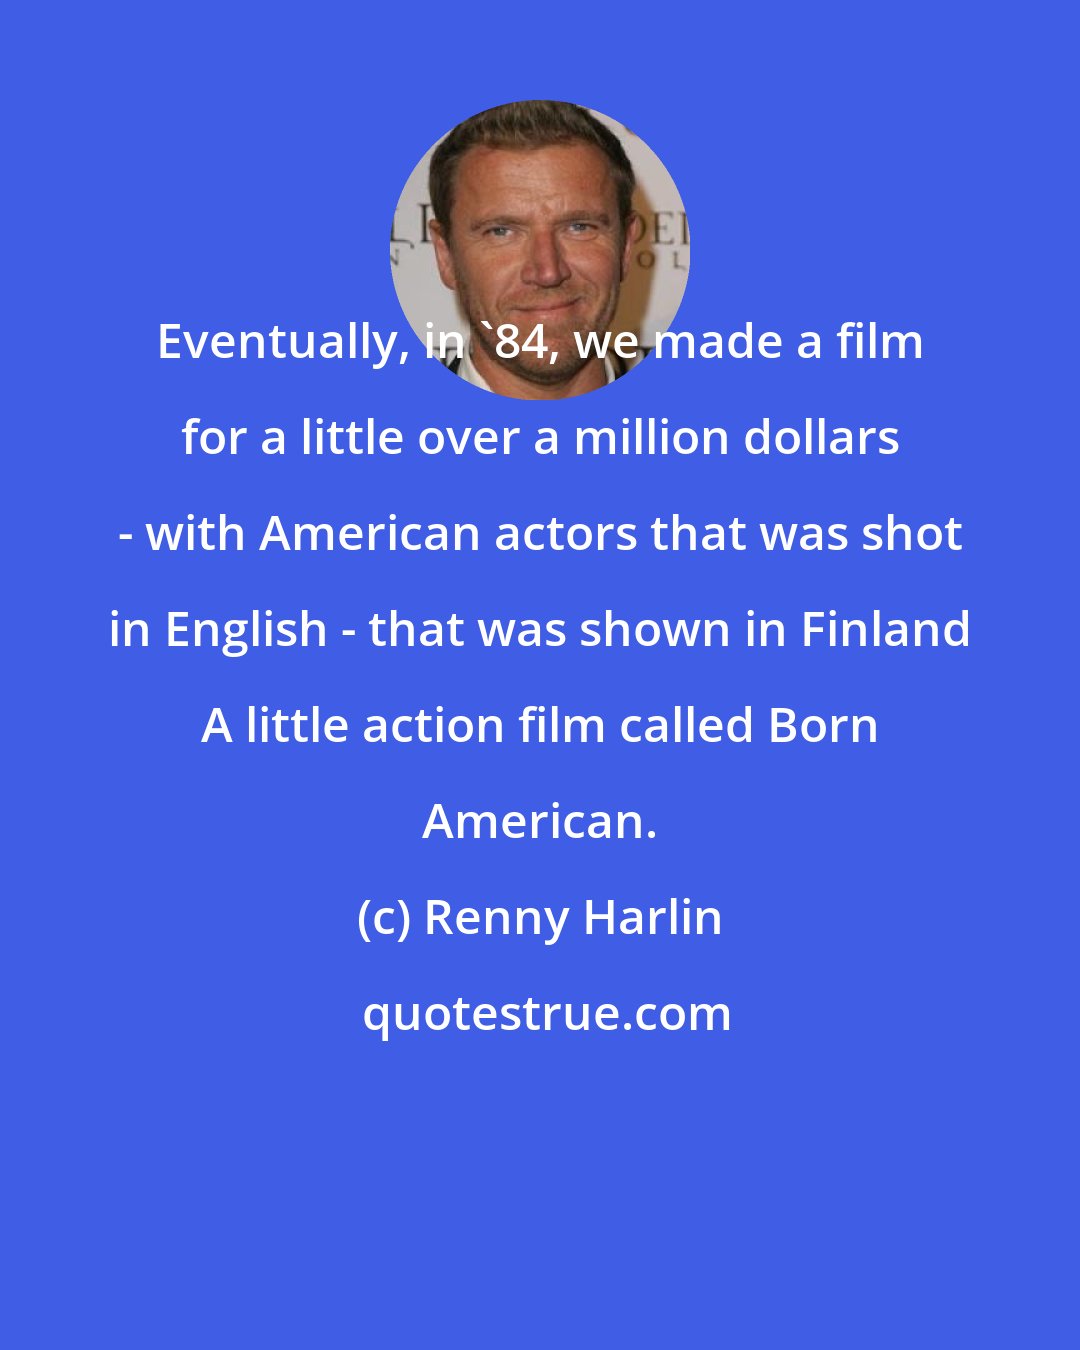 Renny Harlin: Eventually, in '84, we made a film for a little over a million dollars - with American actors that was shot in English - that was shown in Finland A little action film called Born American.